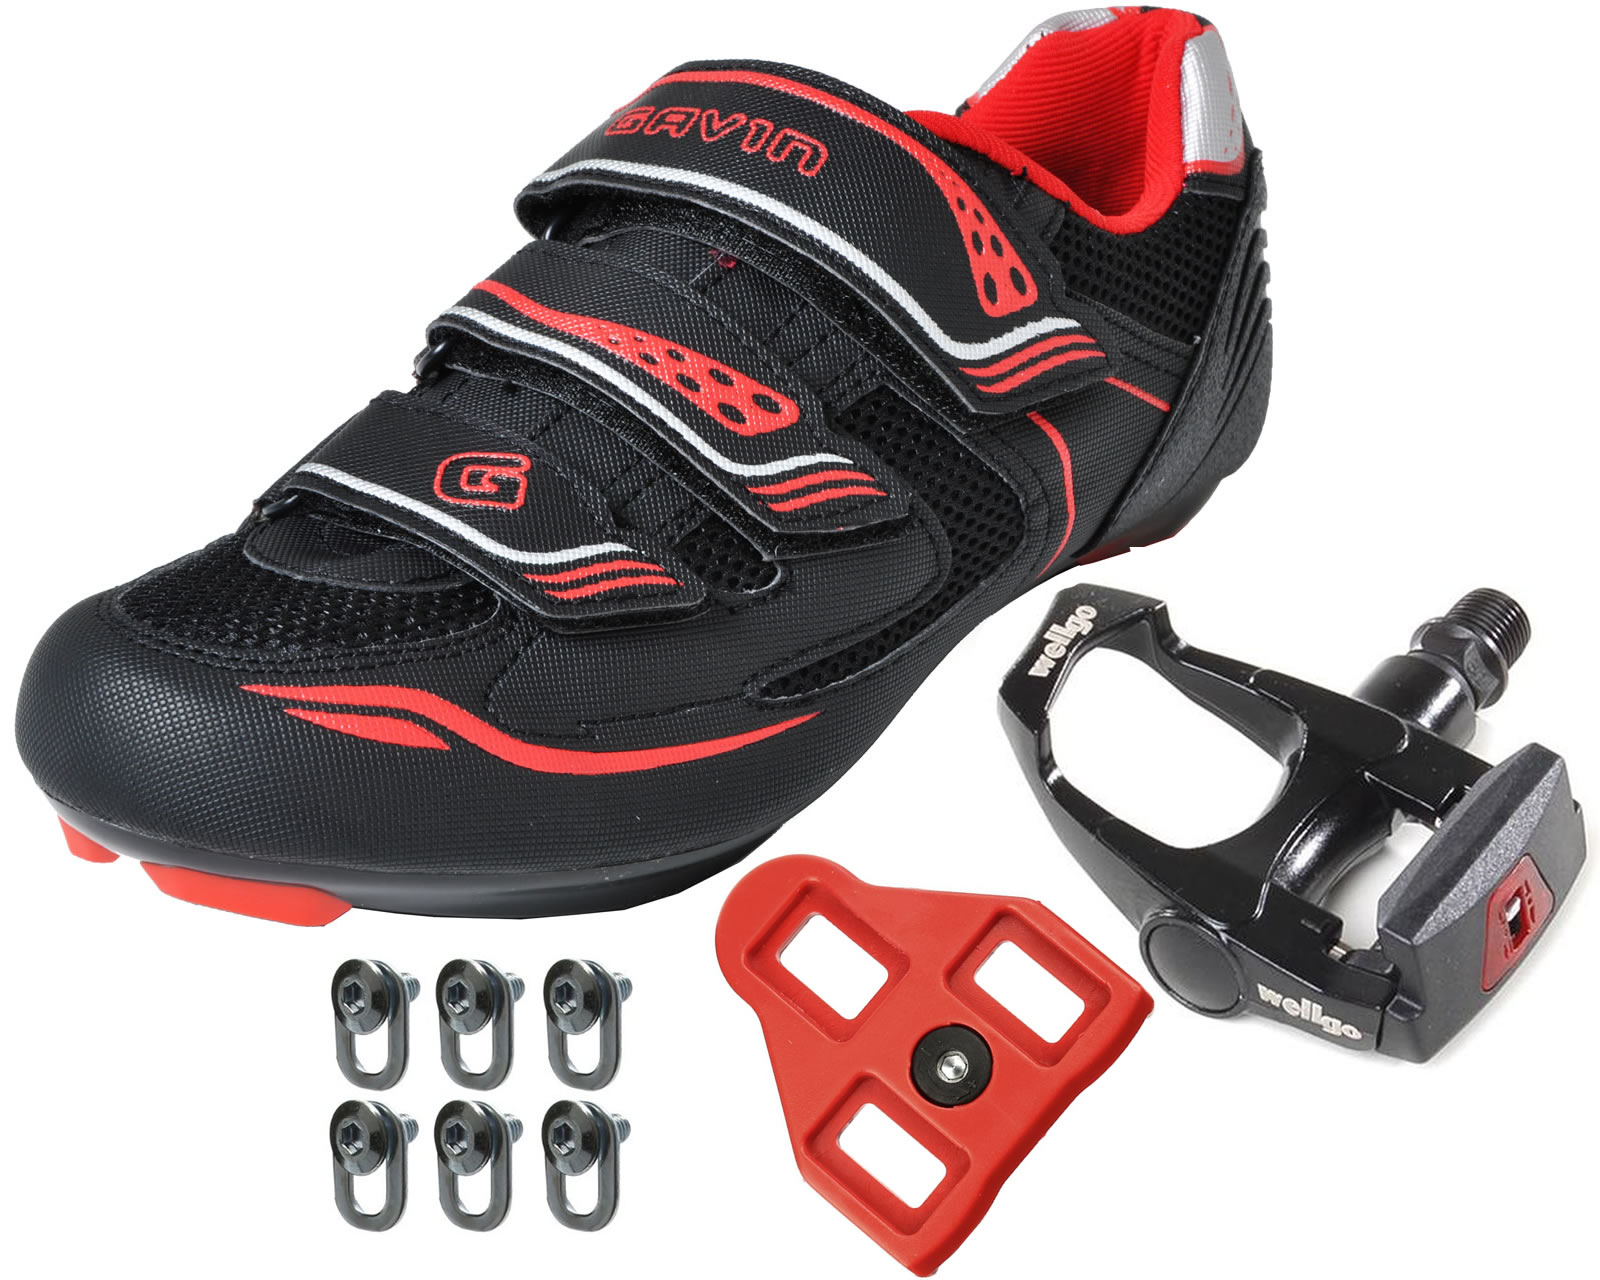 Cycling shoes and pedals